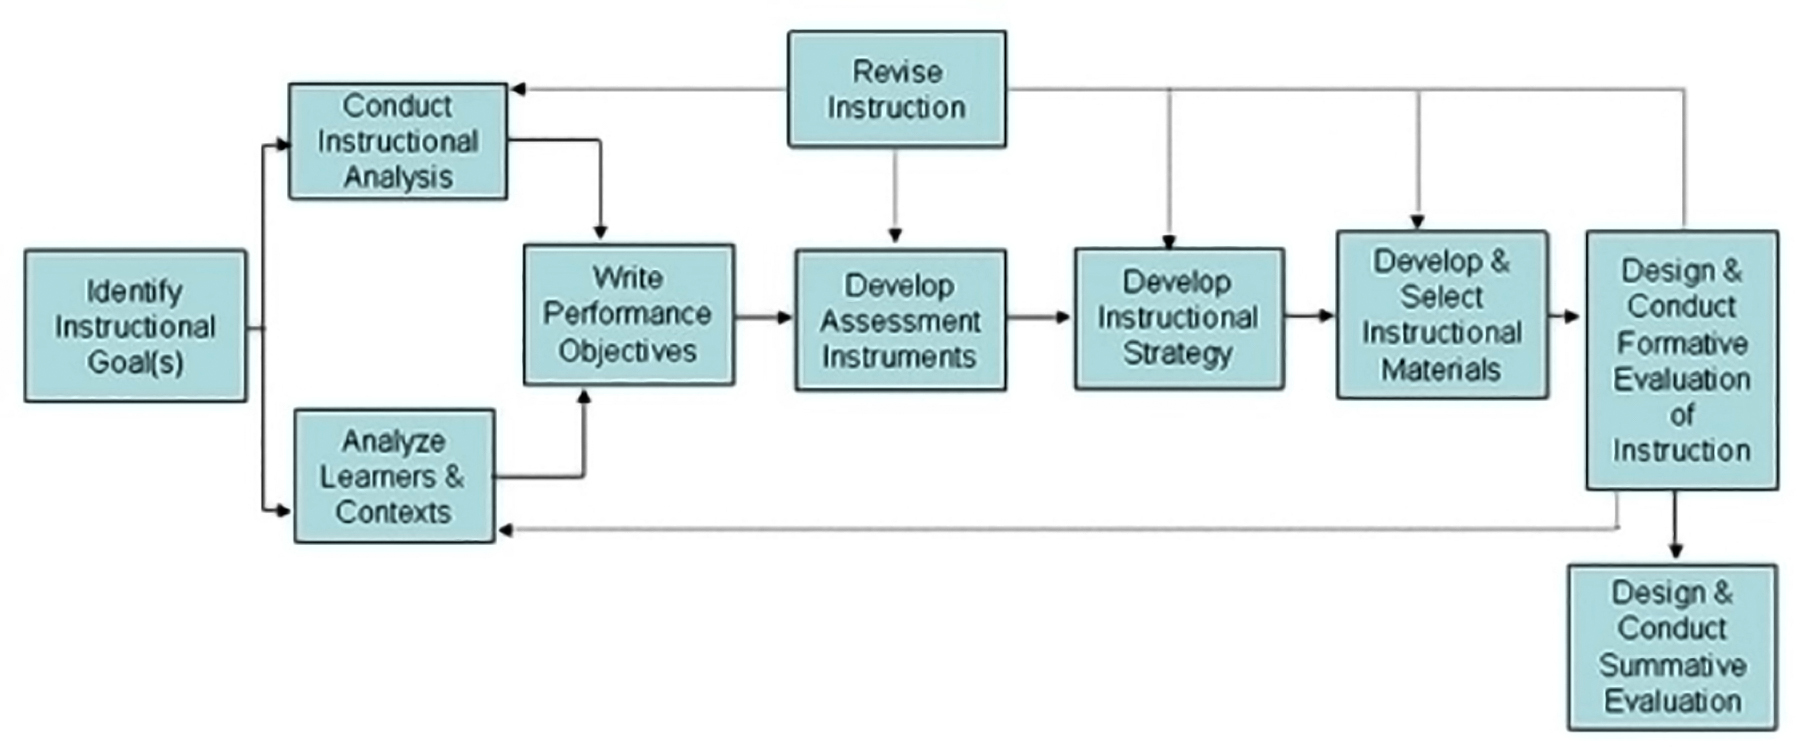 Diagram of the Dick and Carey model of instructional design